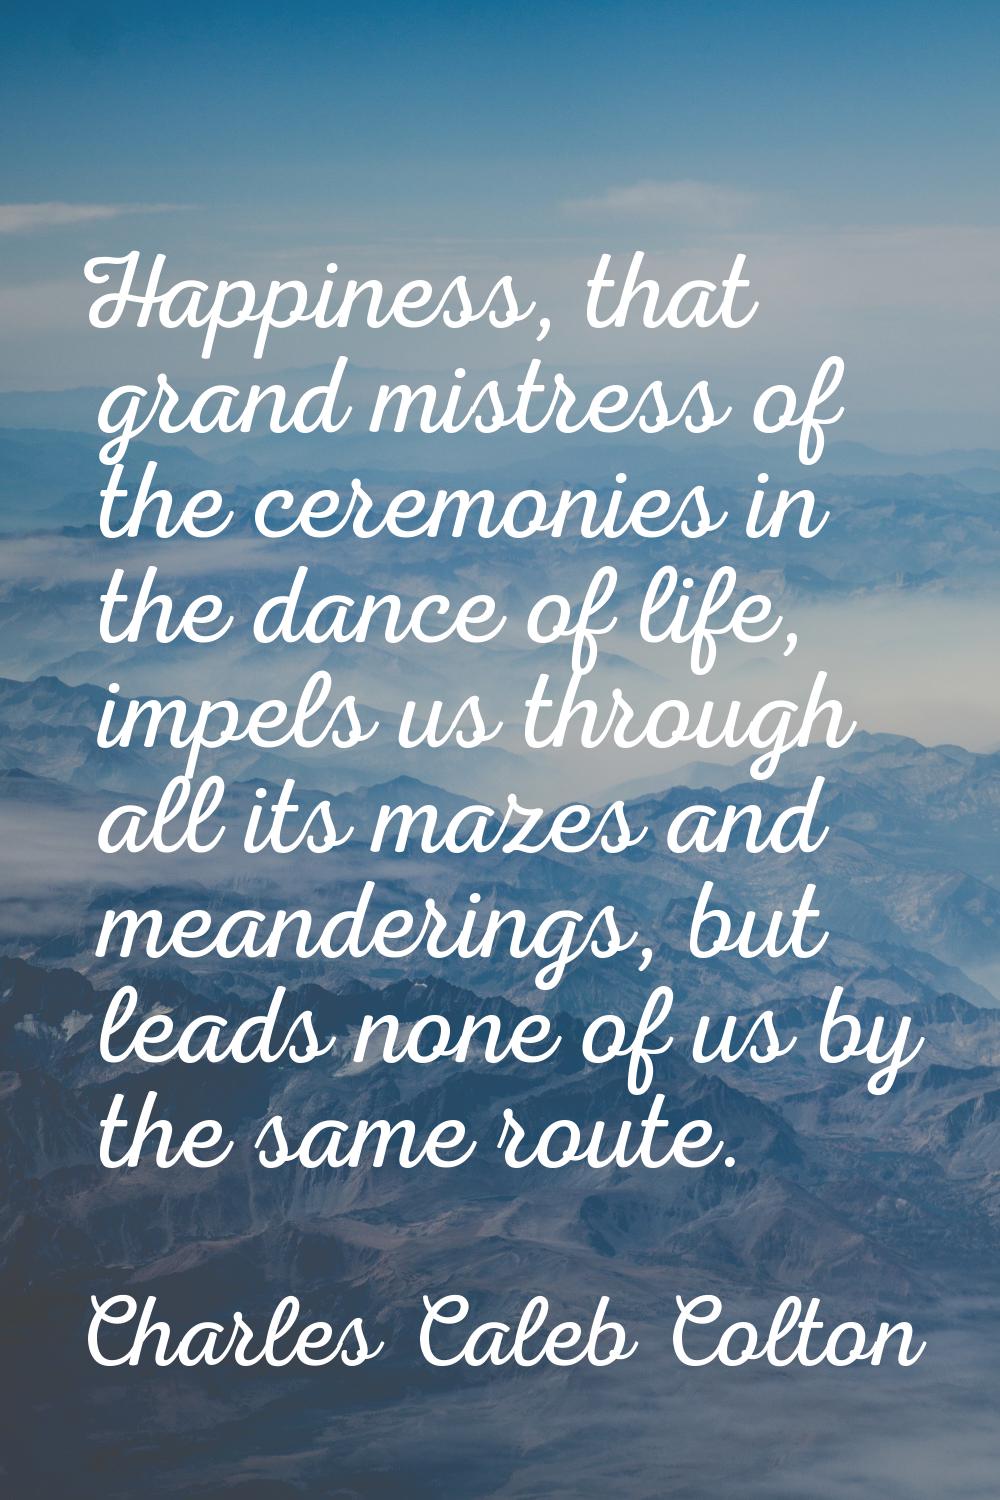 Happiness, that grand mistress of the ceremonies in the dance of life, impels us through all its ma